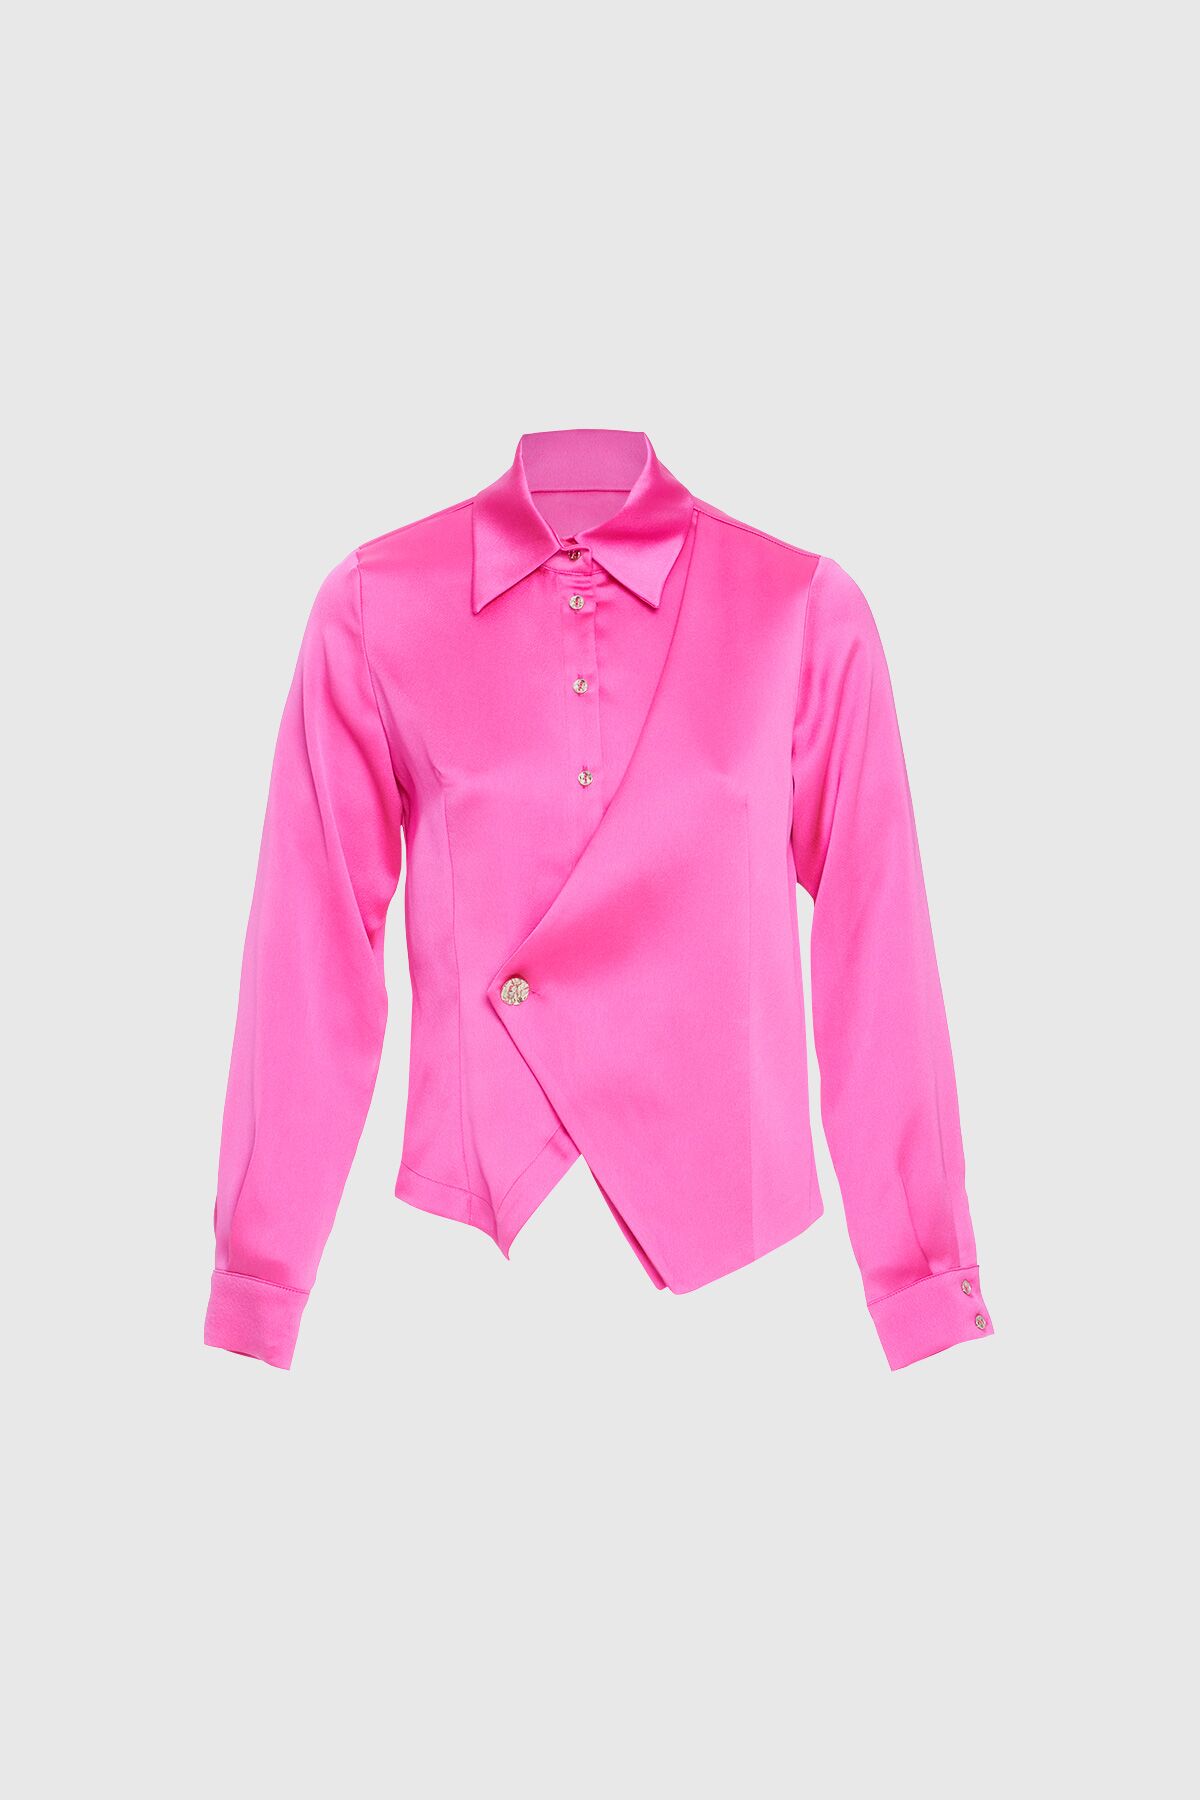 4G CLASSIC - Button Detailed Pink Blouse